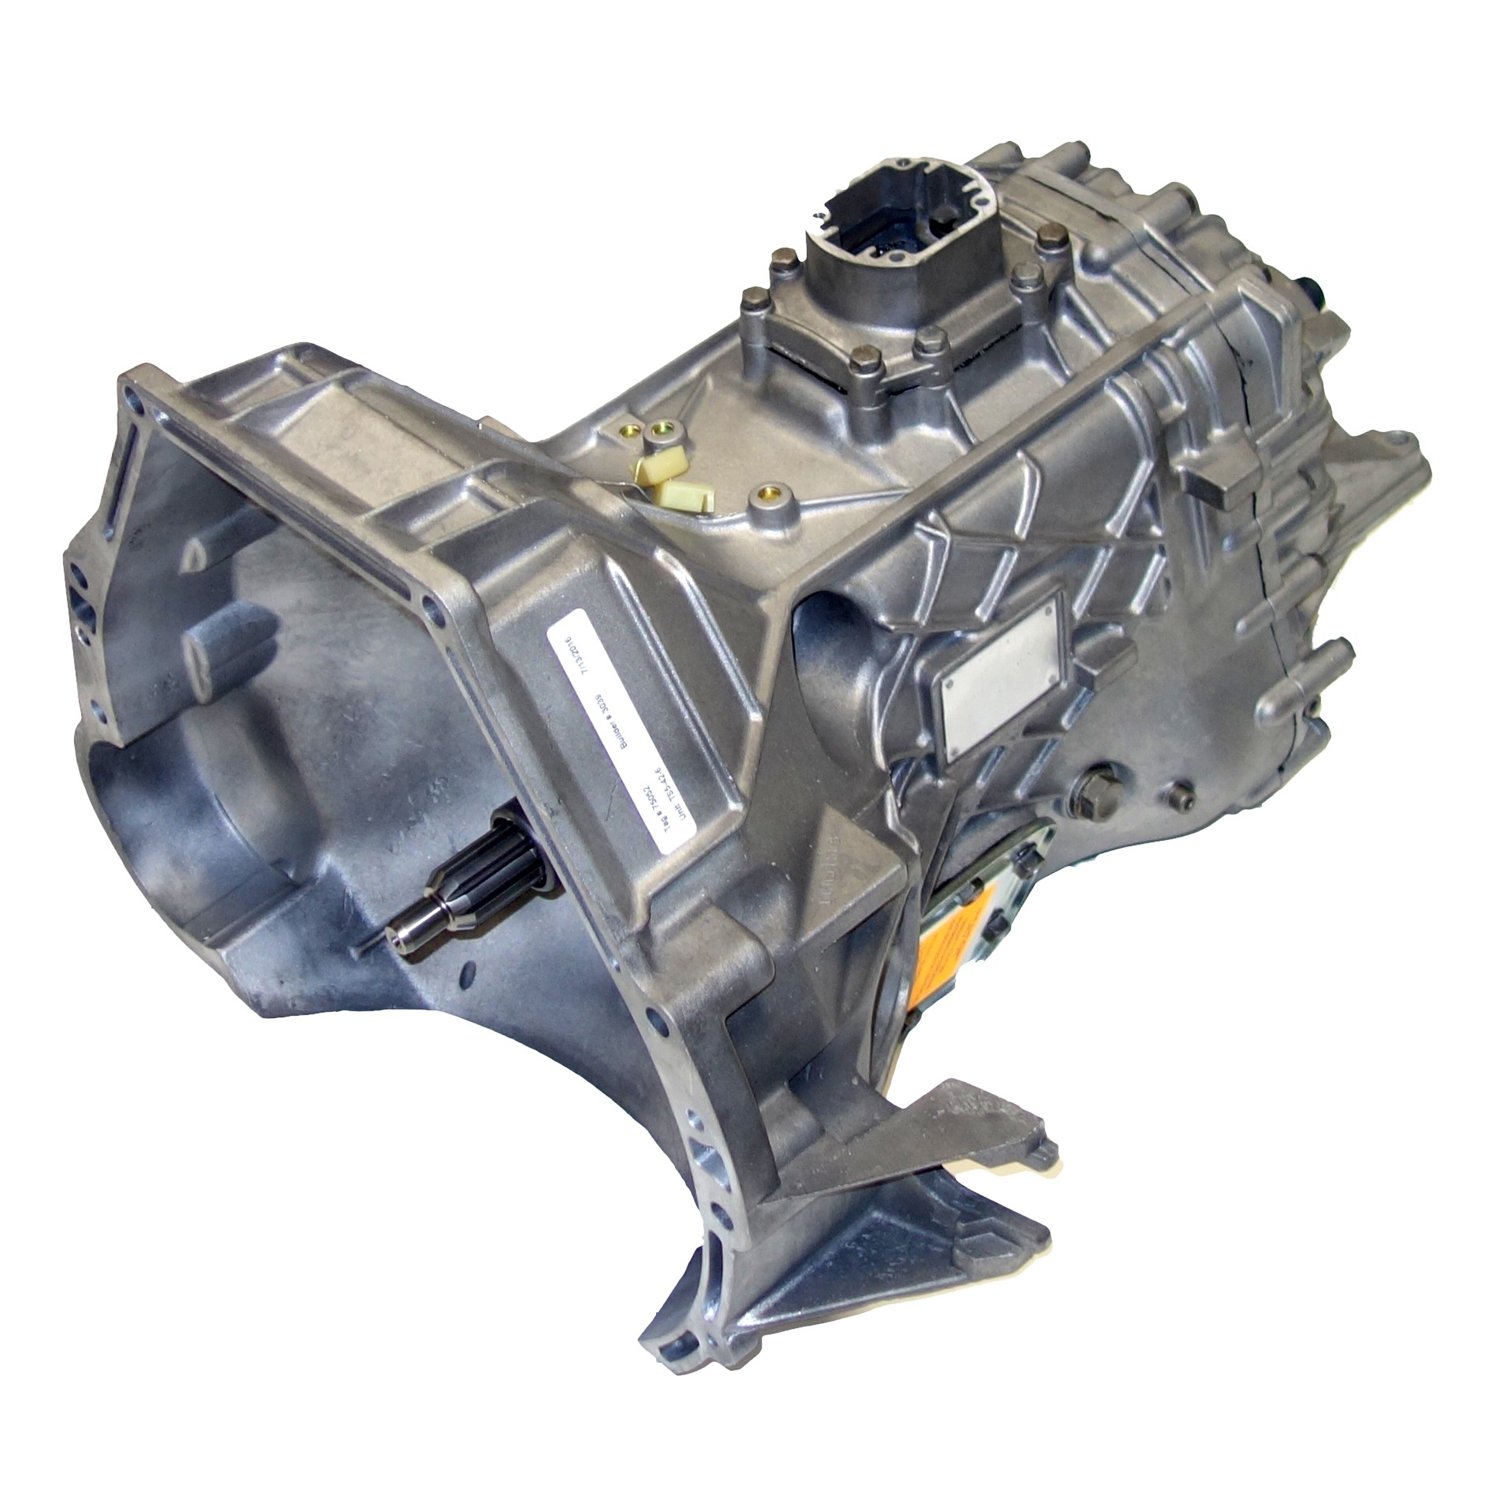 Remanufactured S5-42 Manual Trans for 87-92 F-series 6.9L & 7.3L, 5 Speed, Power Take Off